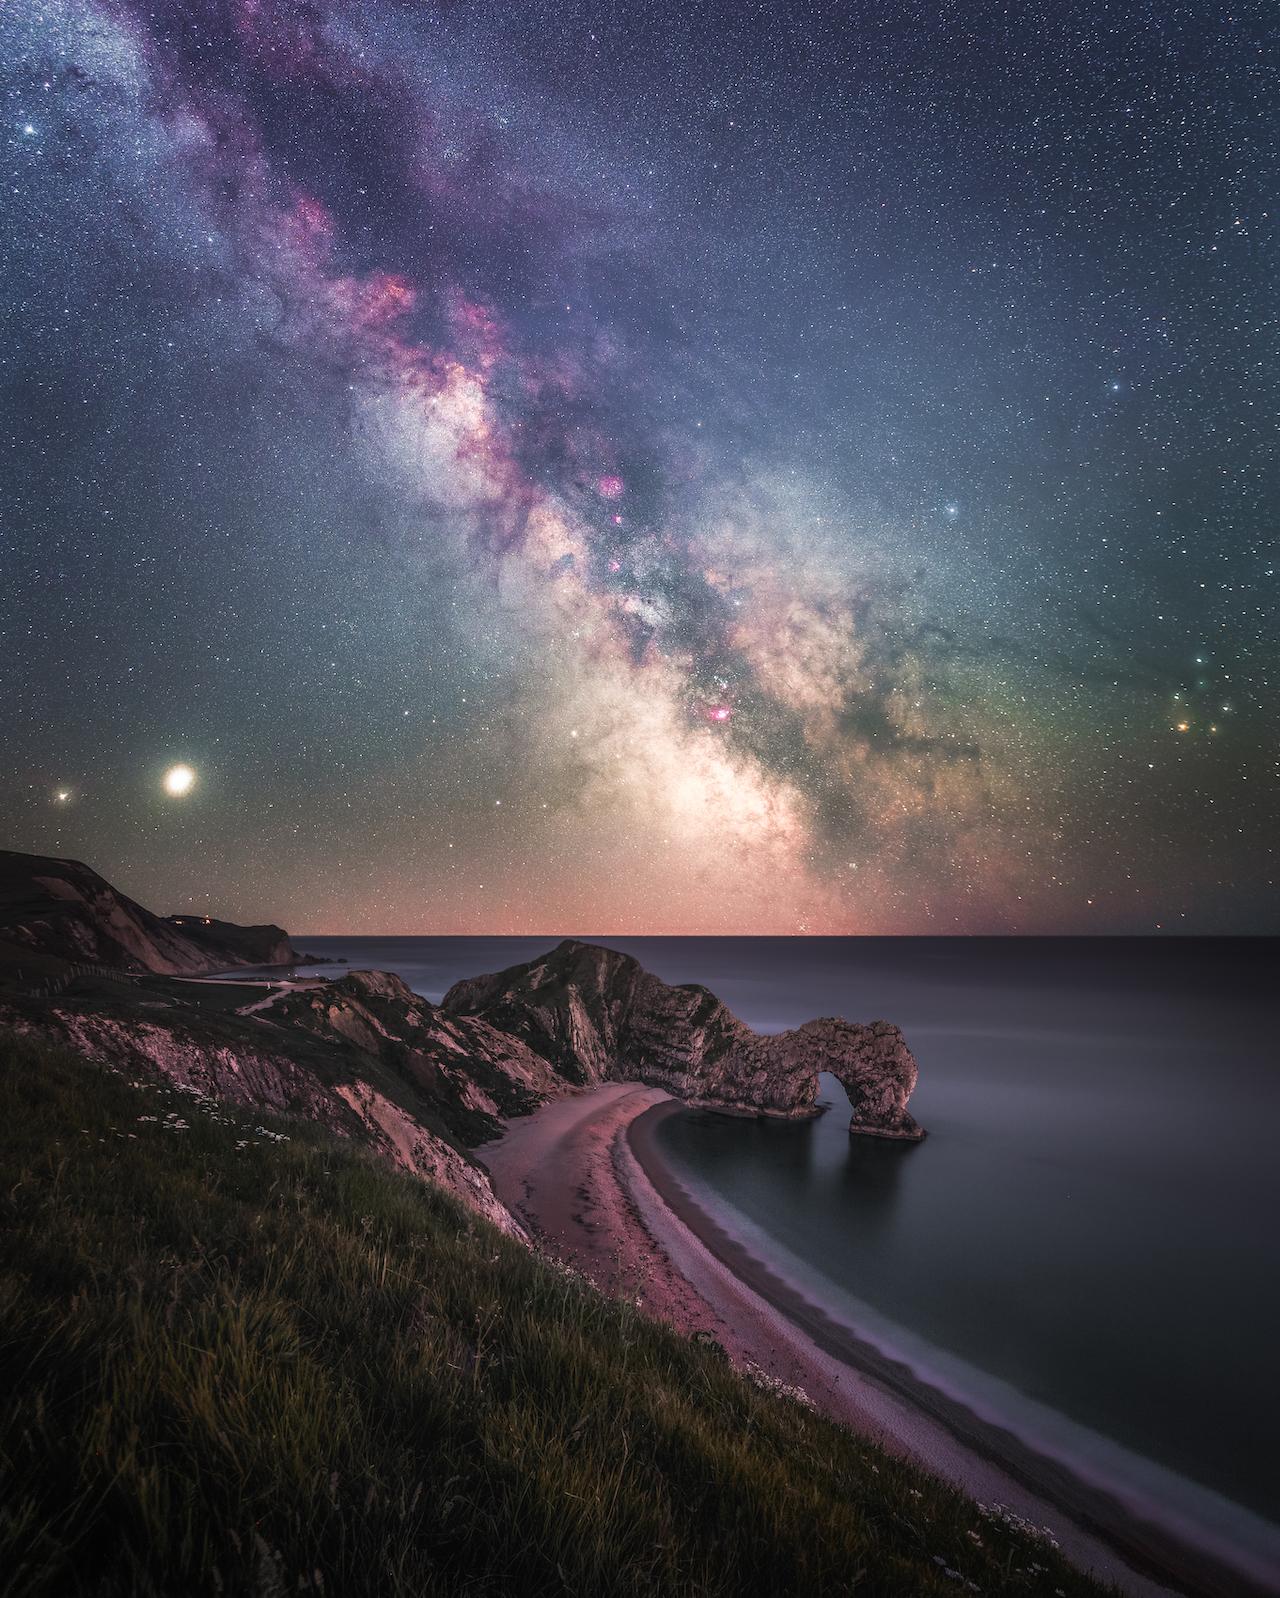 Stars in the Milky Way rising over the rock formation Durdle Door on the Jurassic Coast